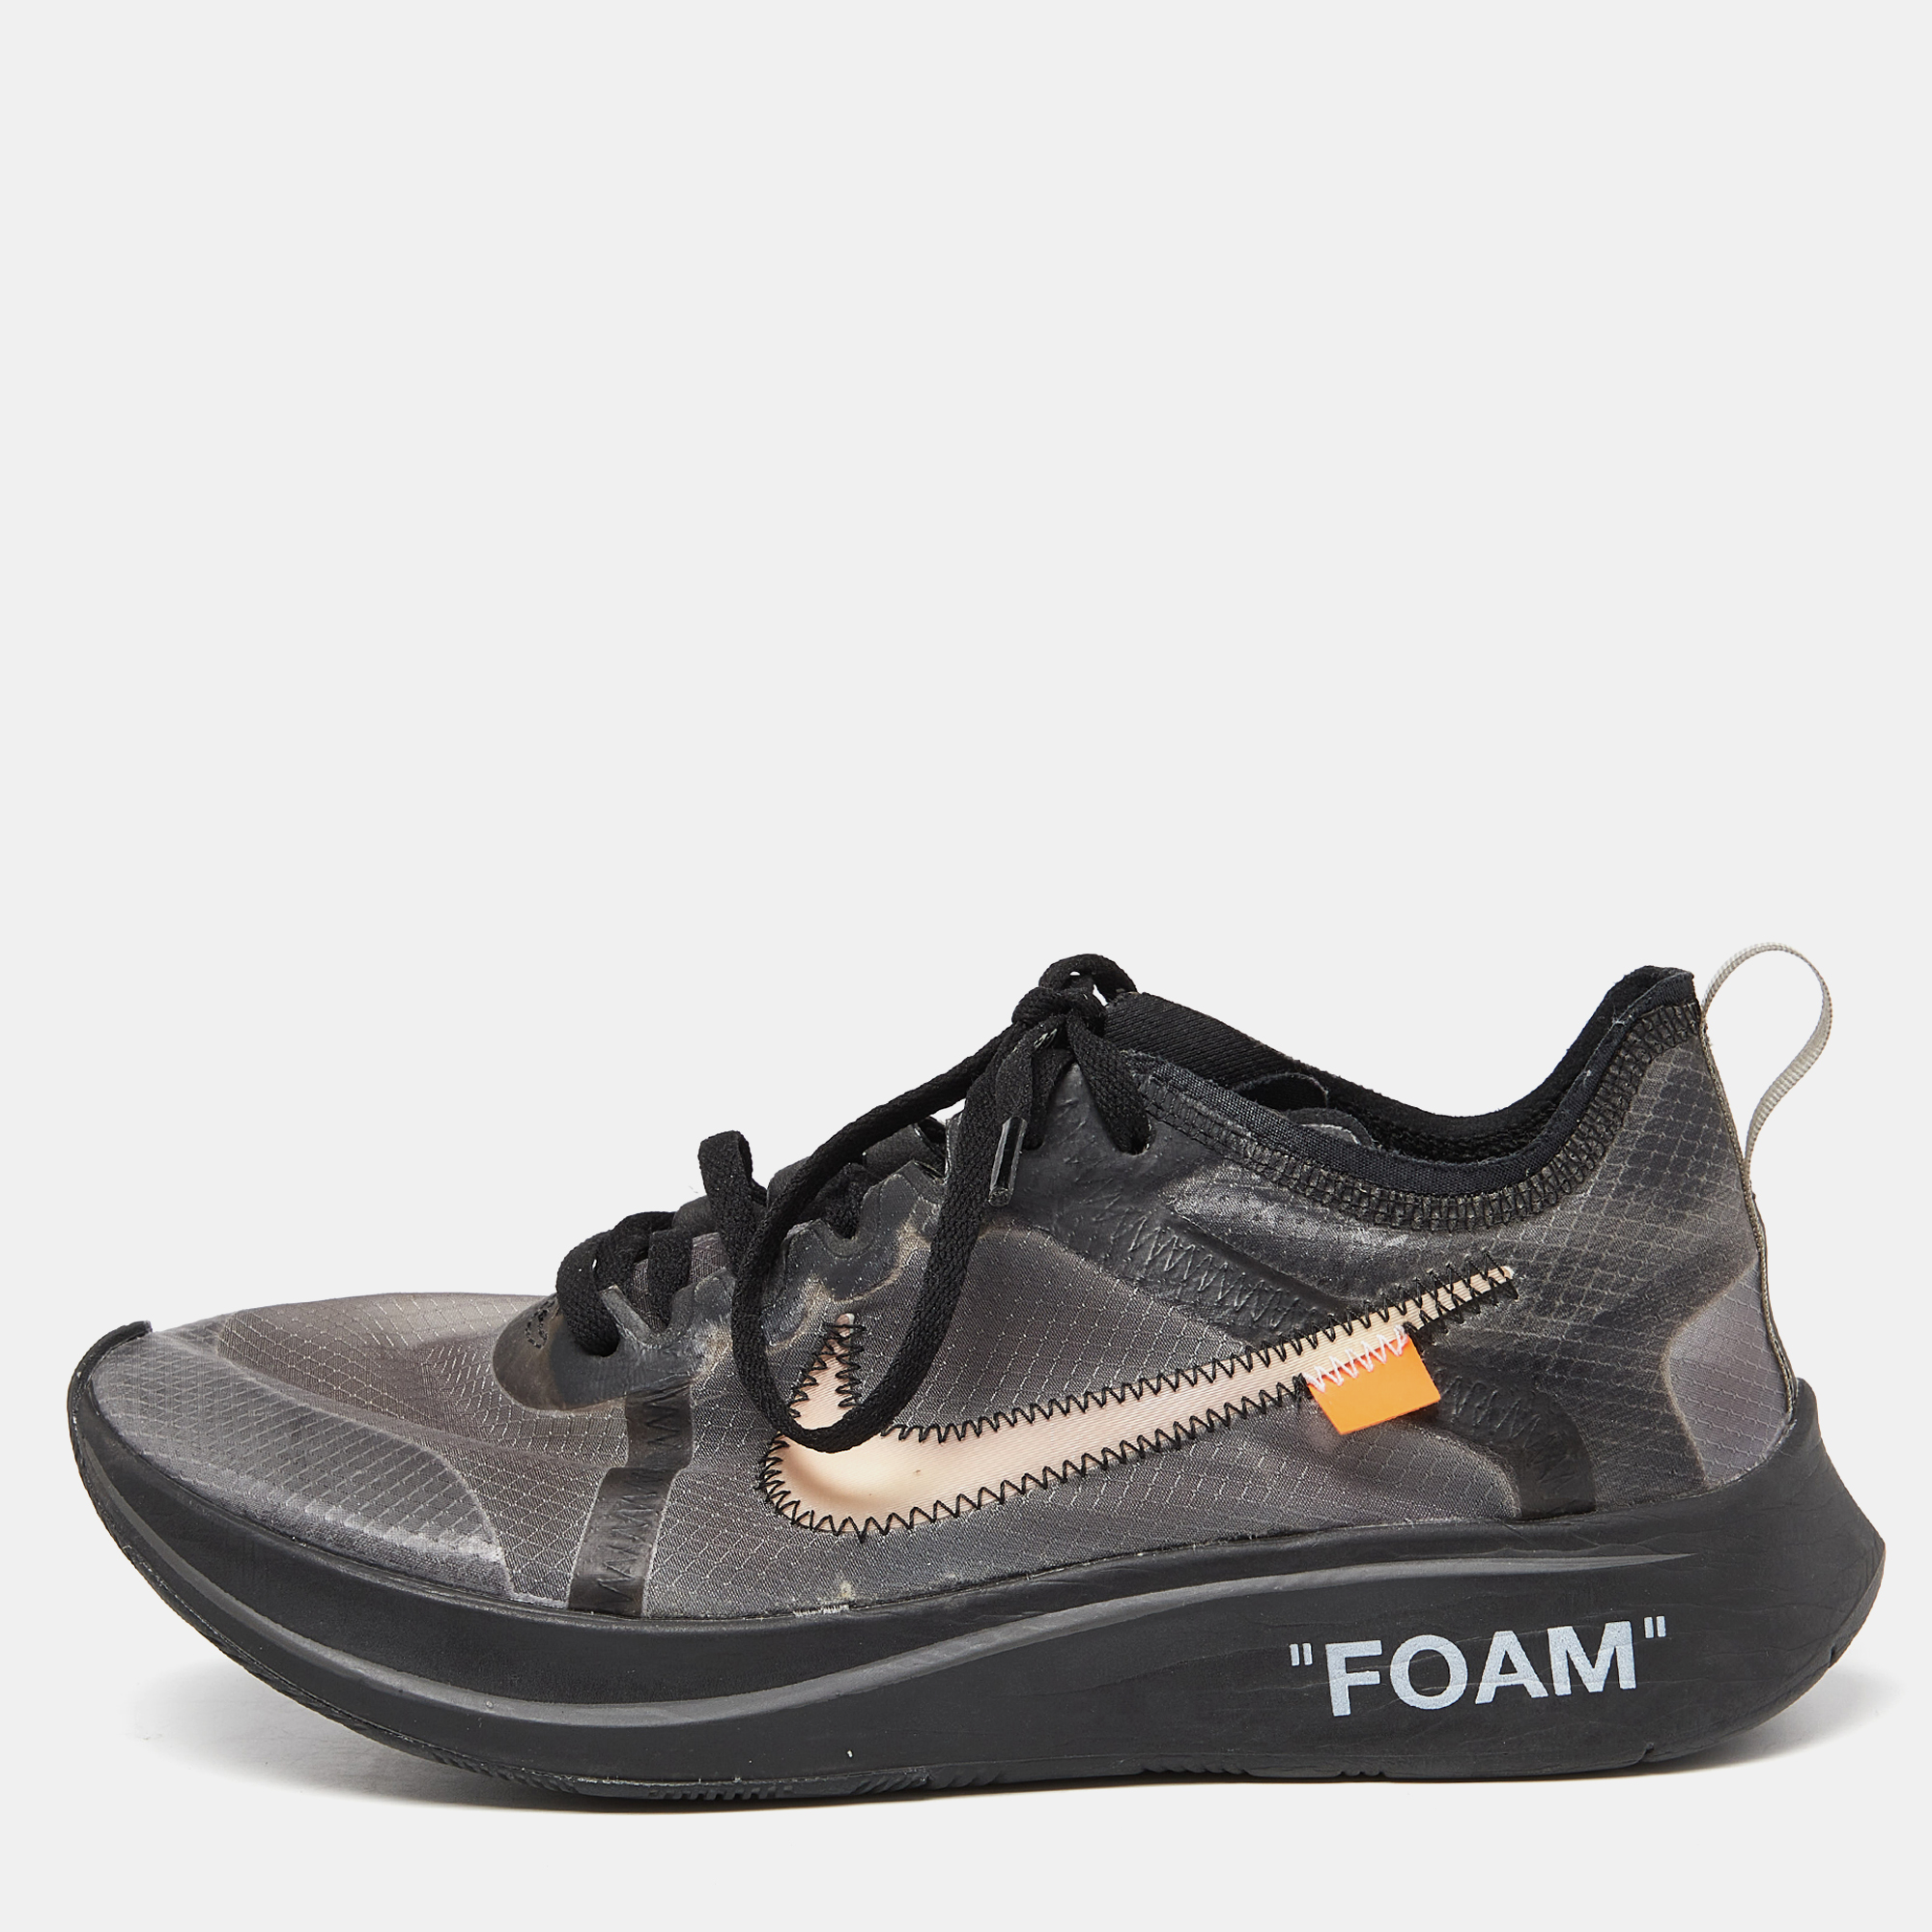 

Off White x Nike Two Tone Mesh Zoom Fly SP Black Sneakers Size